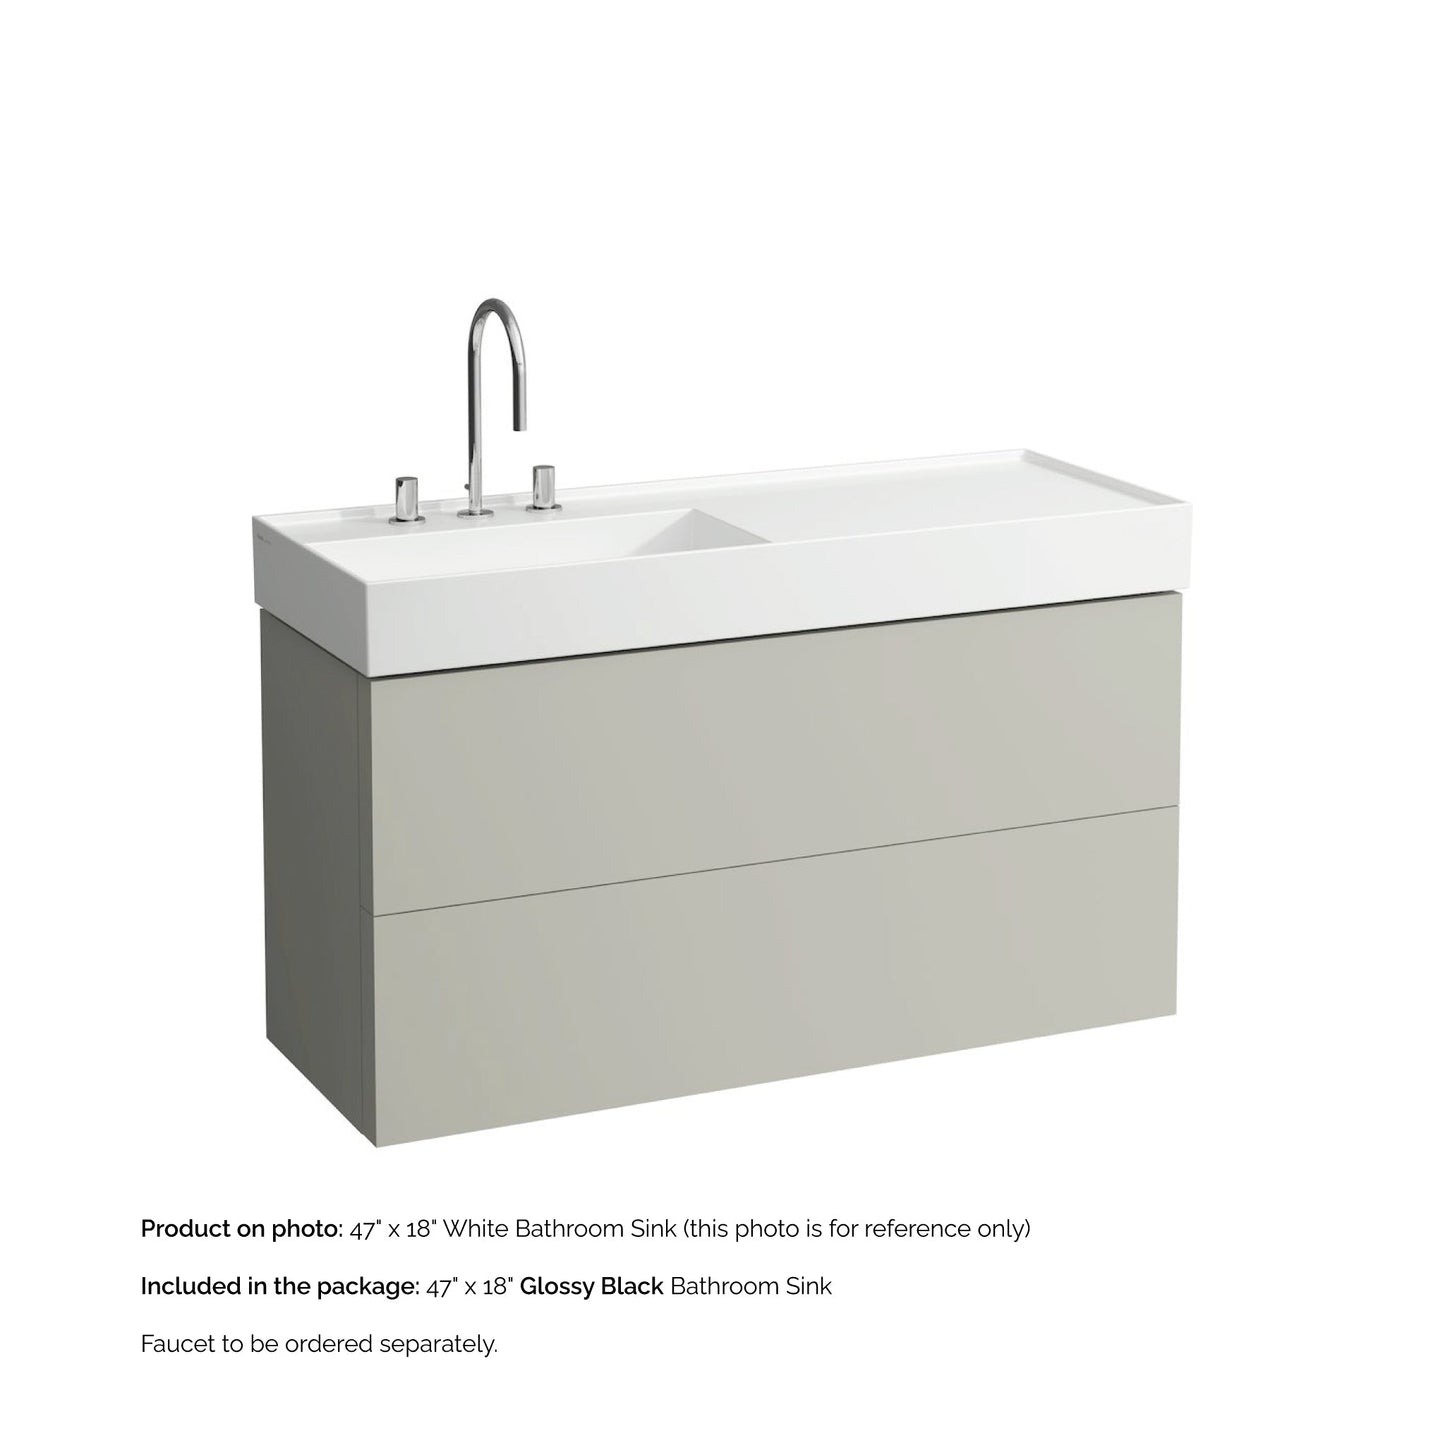 Laufen Kartell 47" x 18" Glossy Black Wall-Mounted Shelf-Right Bathroom Sink With 3 Faucet Holes